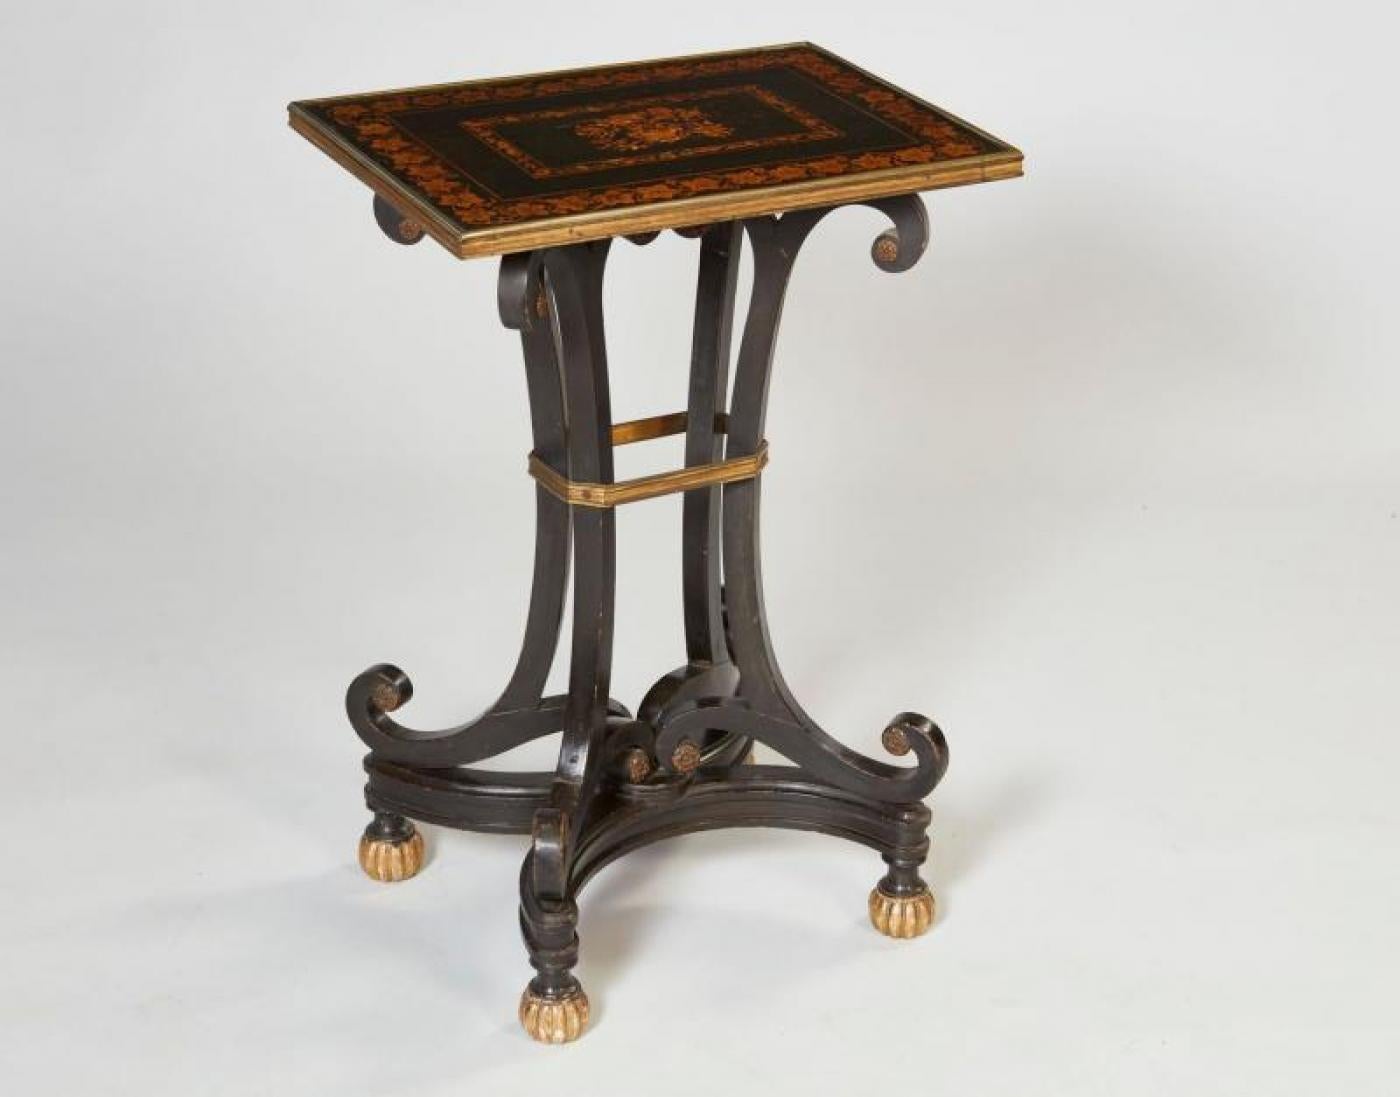 Very fine Regency period side table having a penwork decorated top with chased gilt bronze molded edge over curule legs joined by gilt bronze band and standing on scrolled base with ribbed giltwood ball feet, the whole retaining original painted